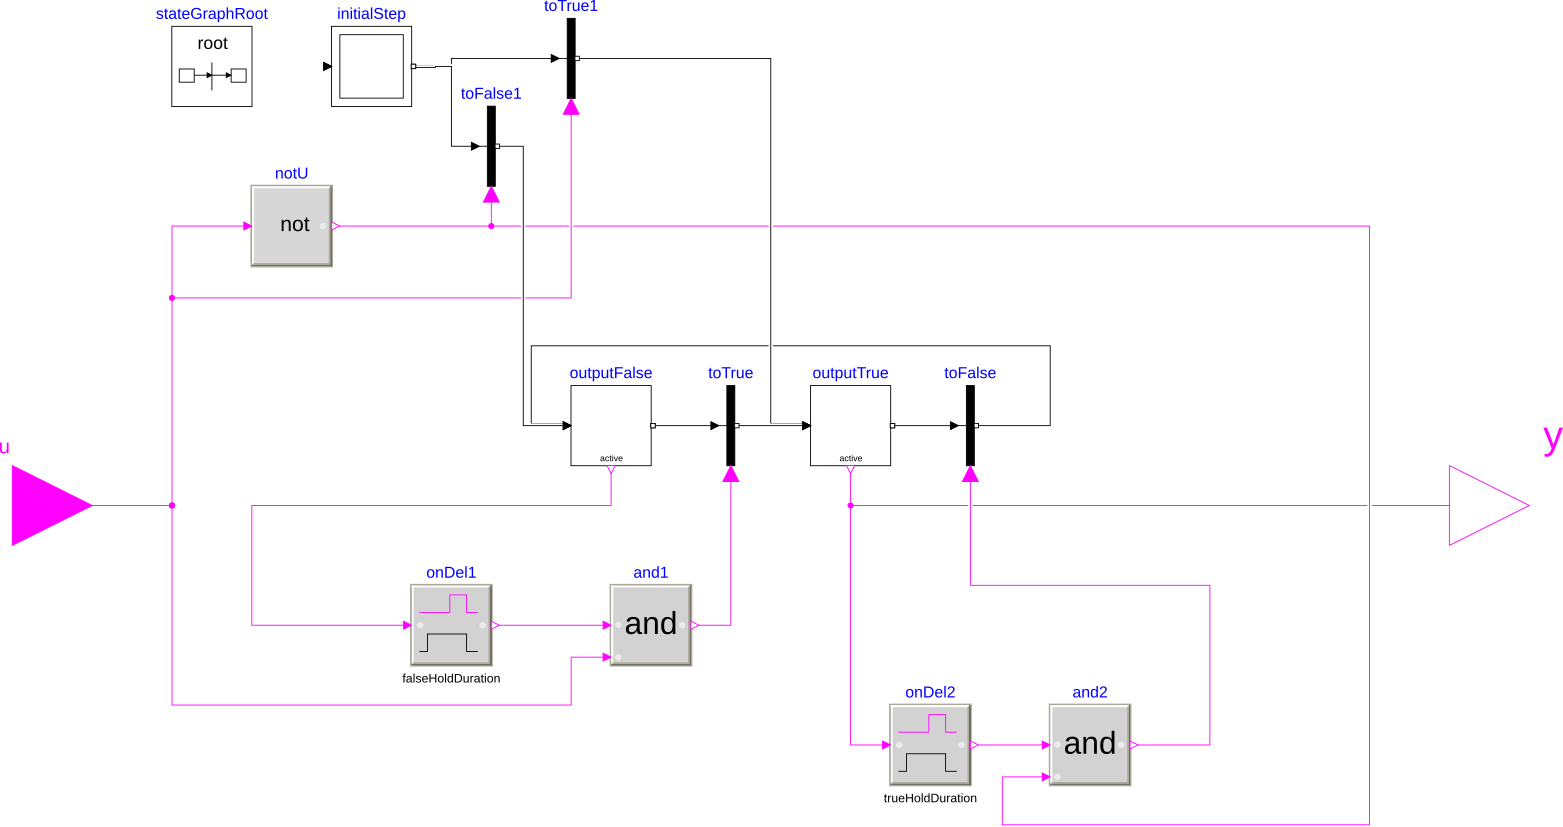 Input and output of the block